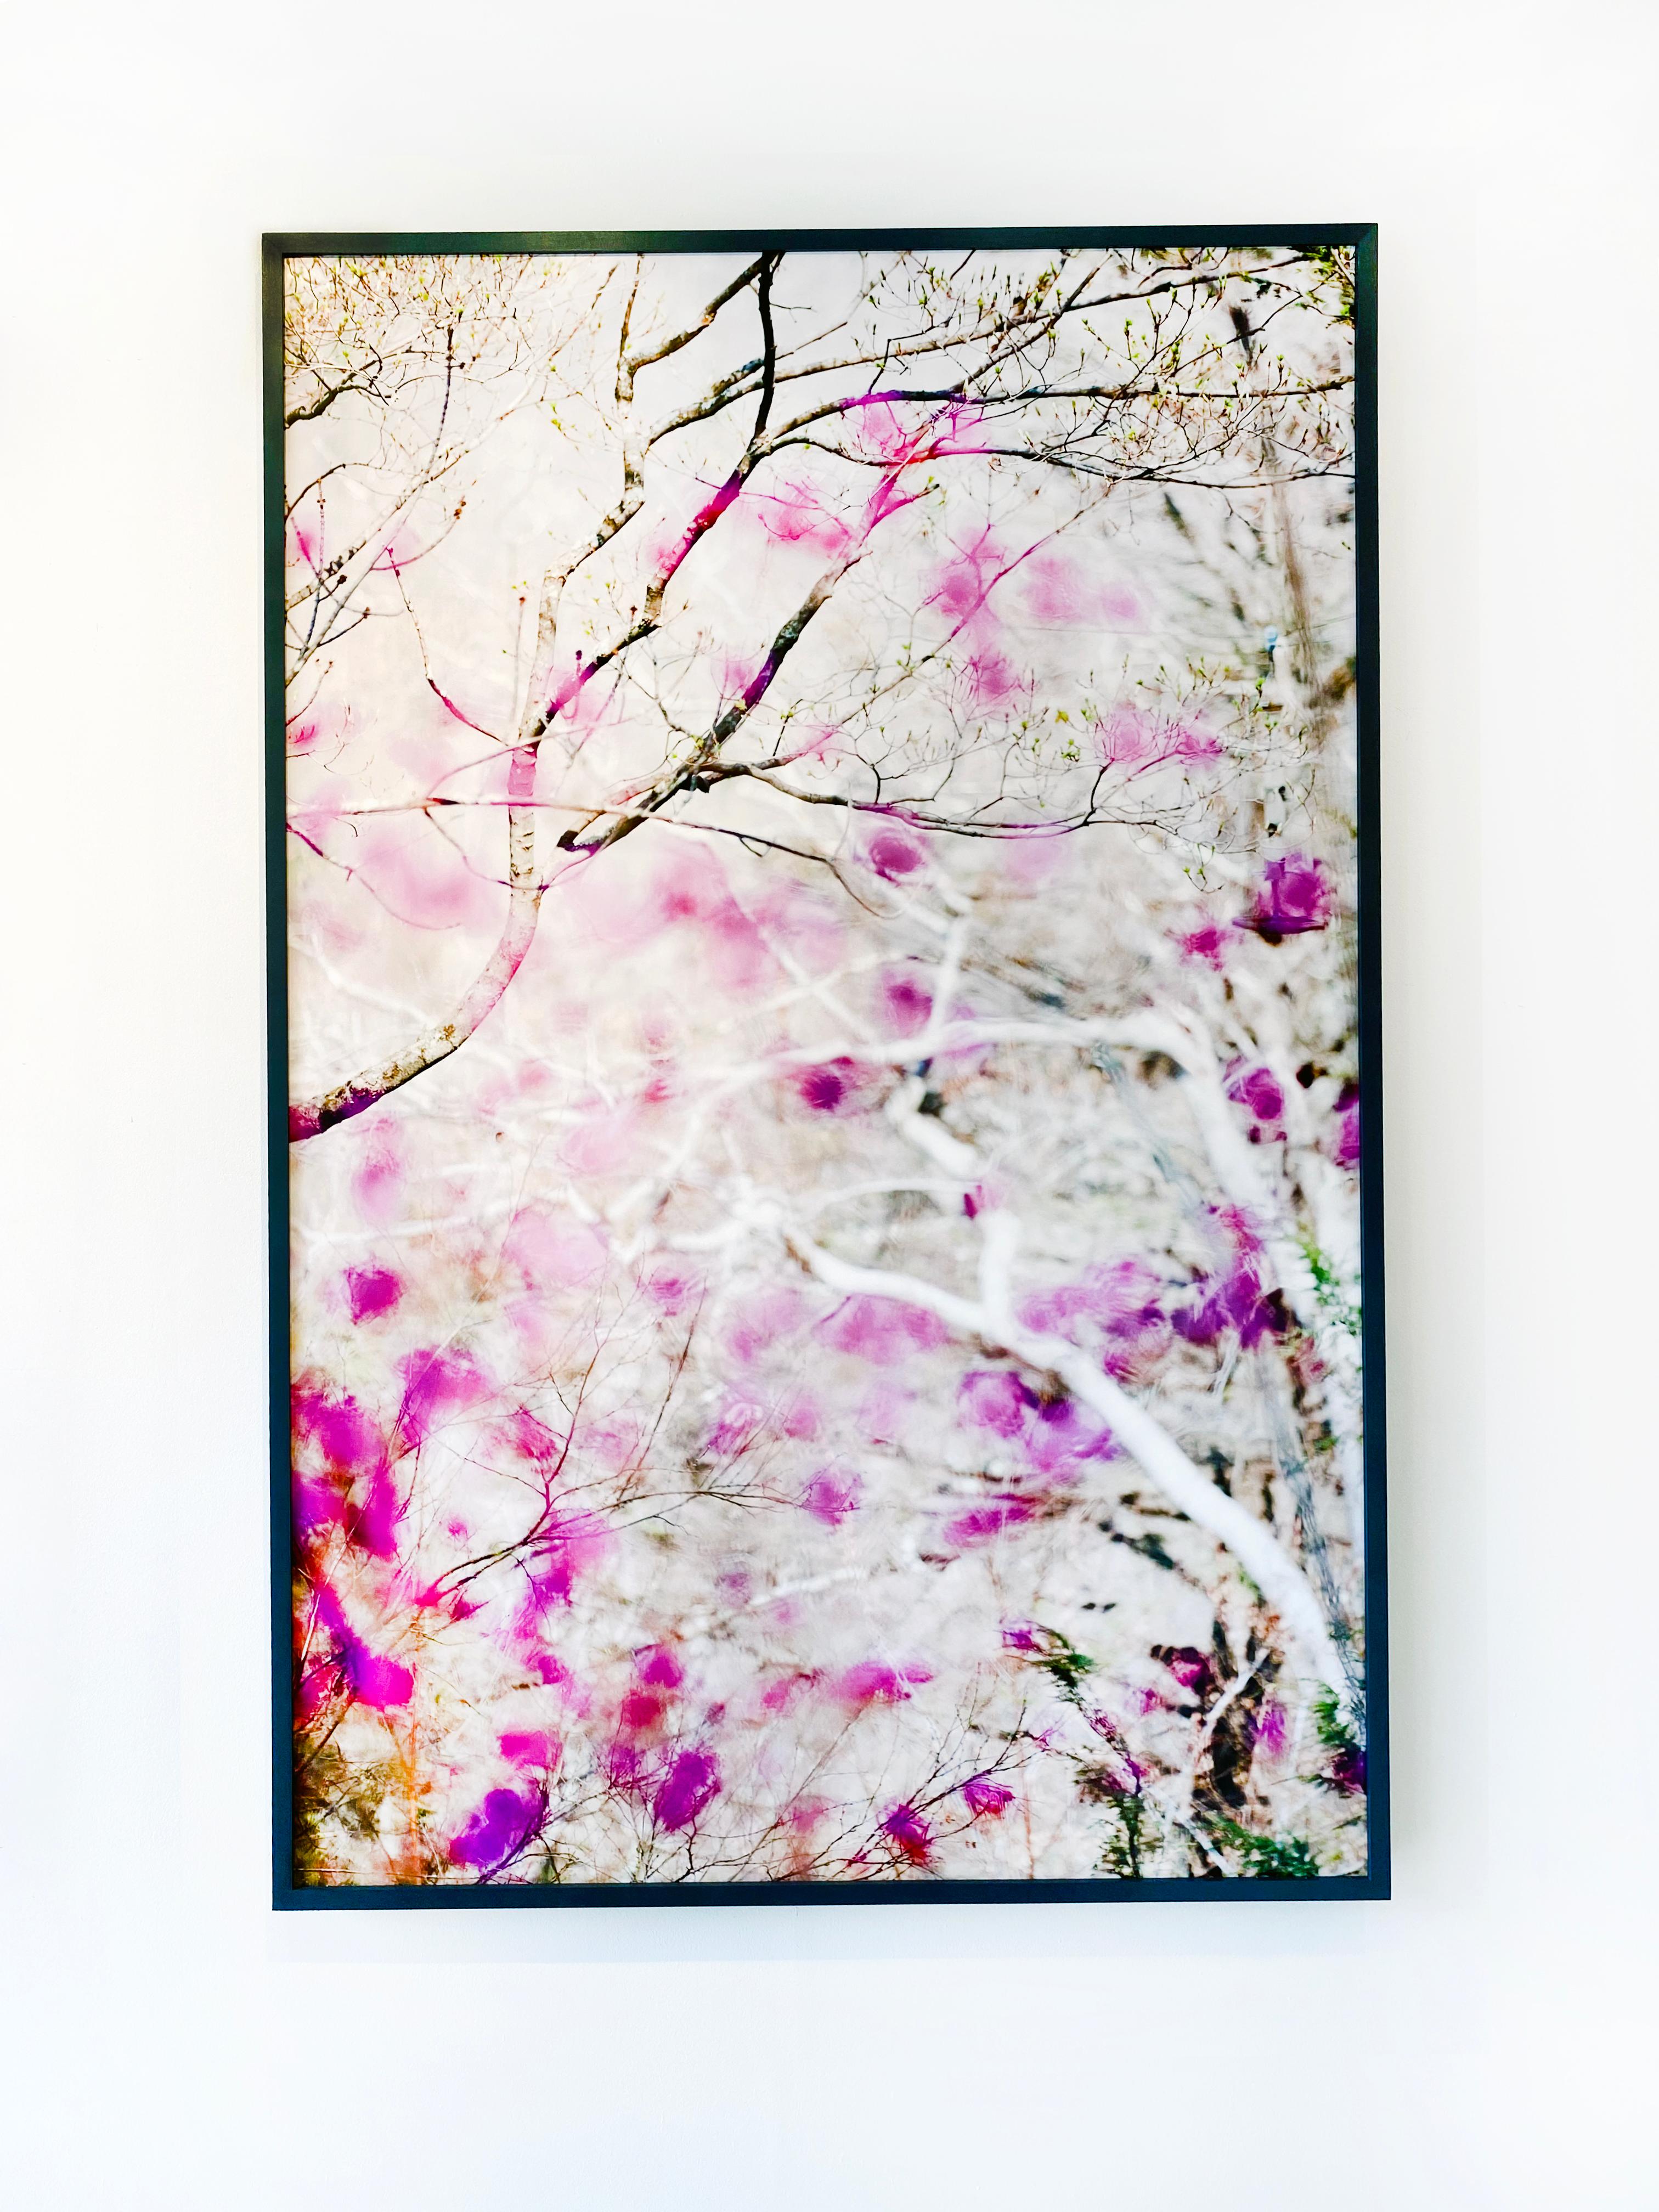 '5.4.15_3:50:51' 2017 by New York, contemporary camera artist Susan Wides. Dye sublimation aluminum, Ed. of 5  60 x 40 in. / Frame: 60.75 x 41 in. This color photograph features a close-up view of a cherry blossom tree in a dark grey frame. Using